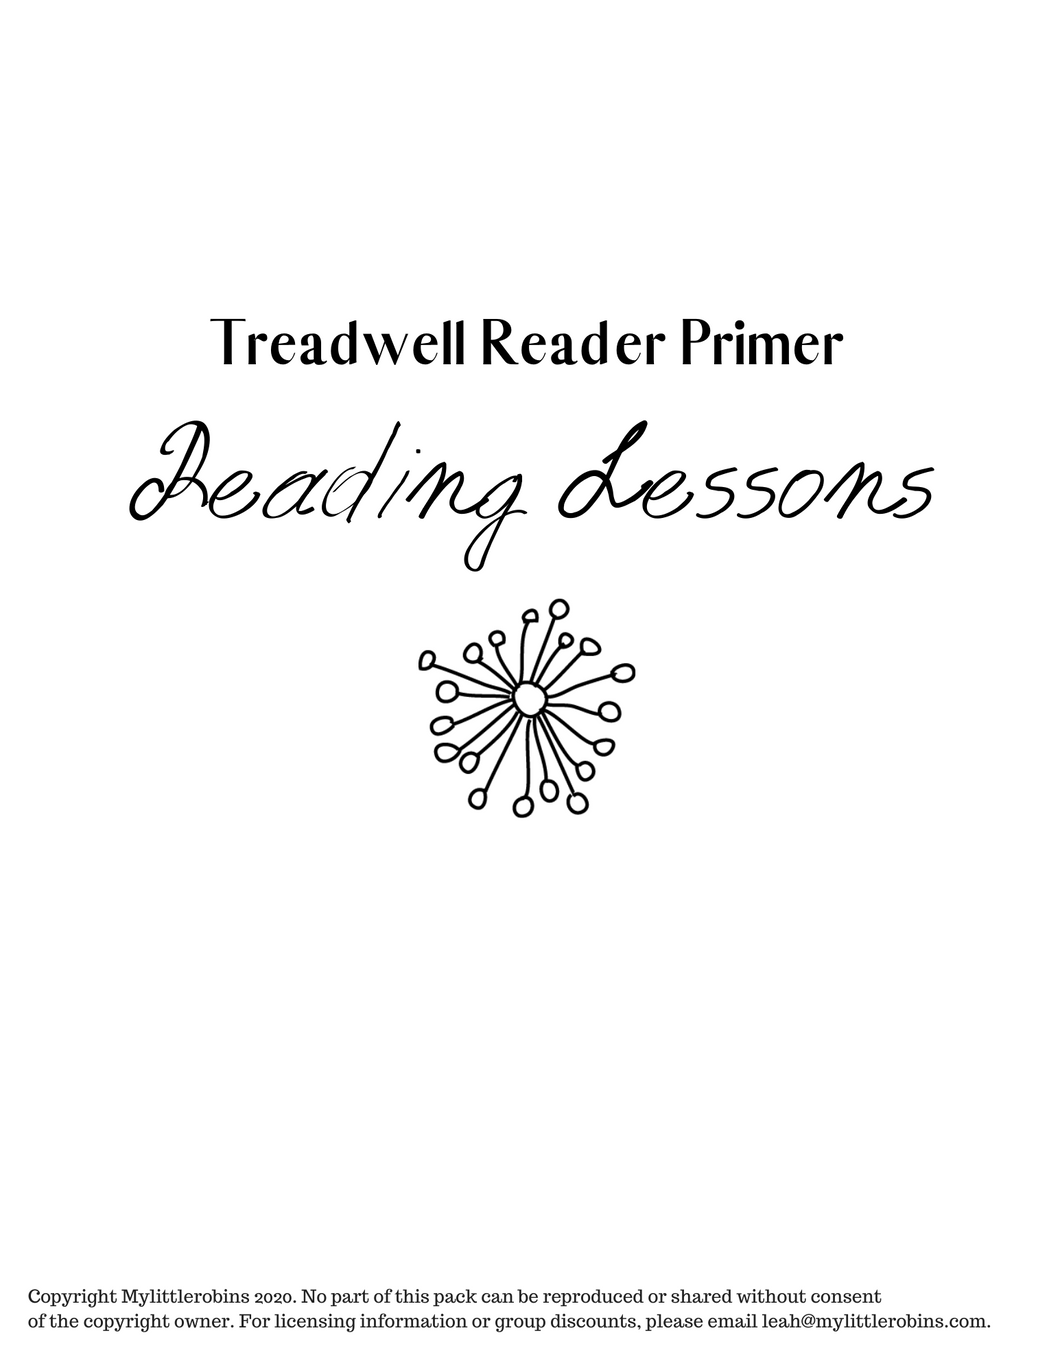 Free and Treadwell Primer Reading Lessons